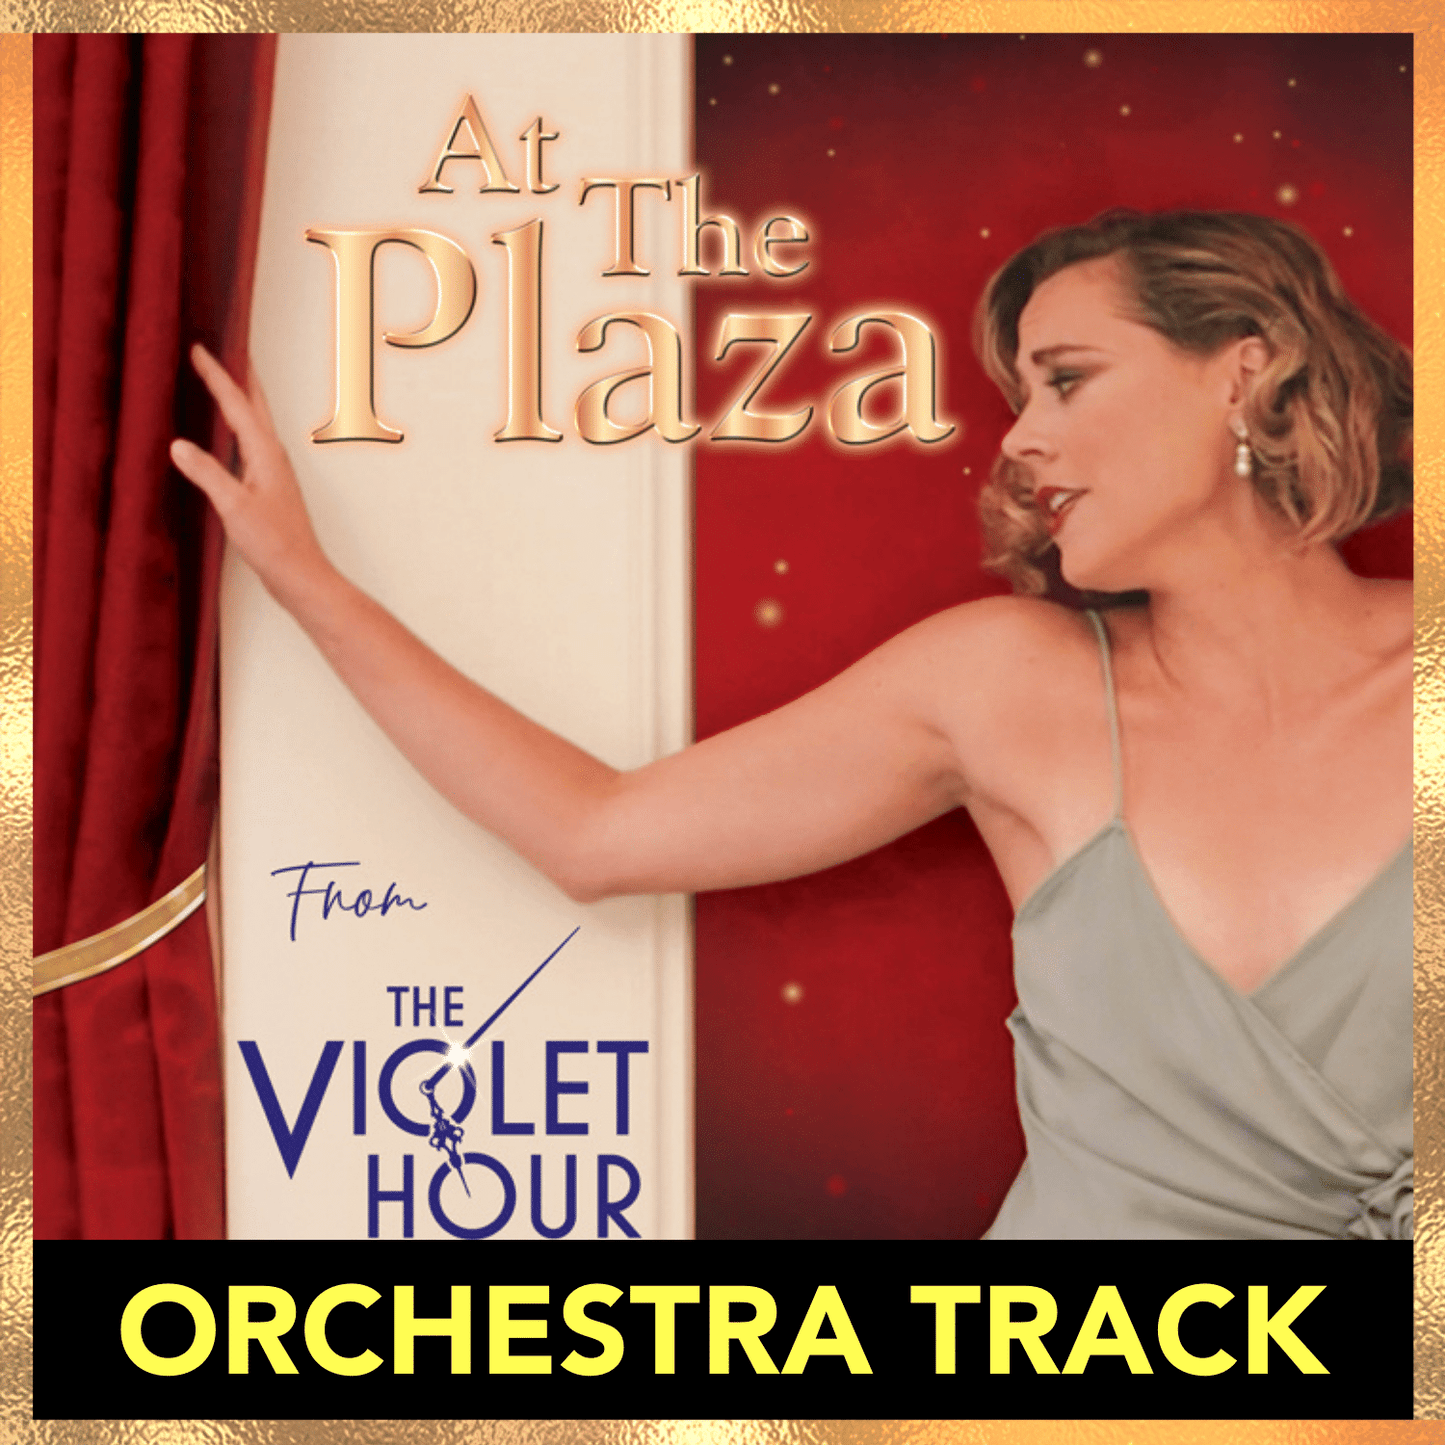 AT THE PLAZA (Orchestra Track)